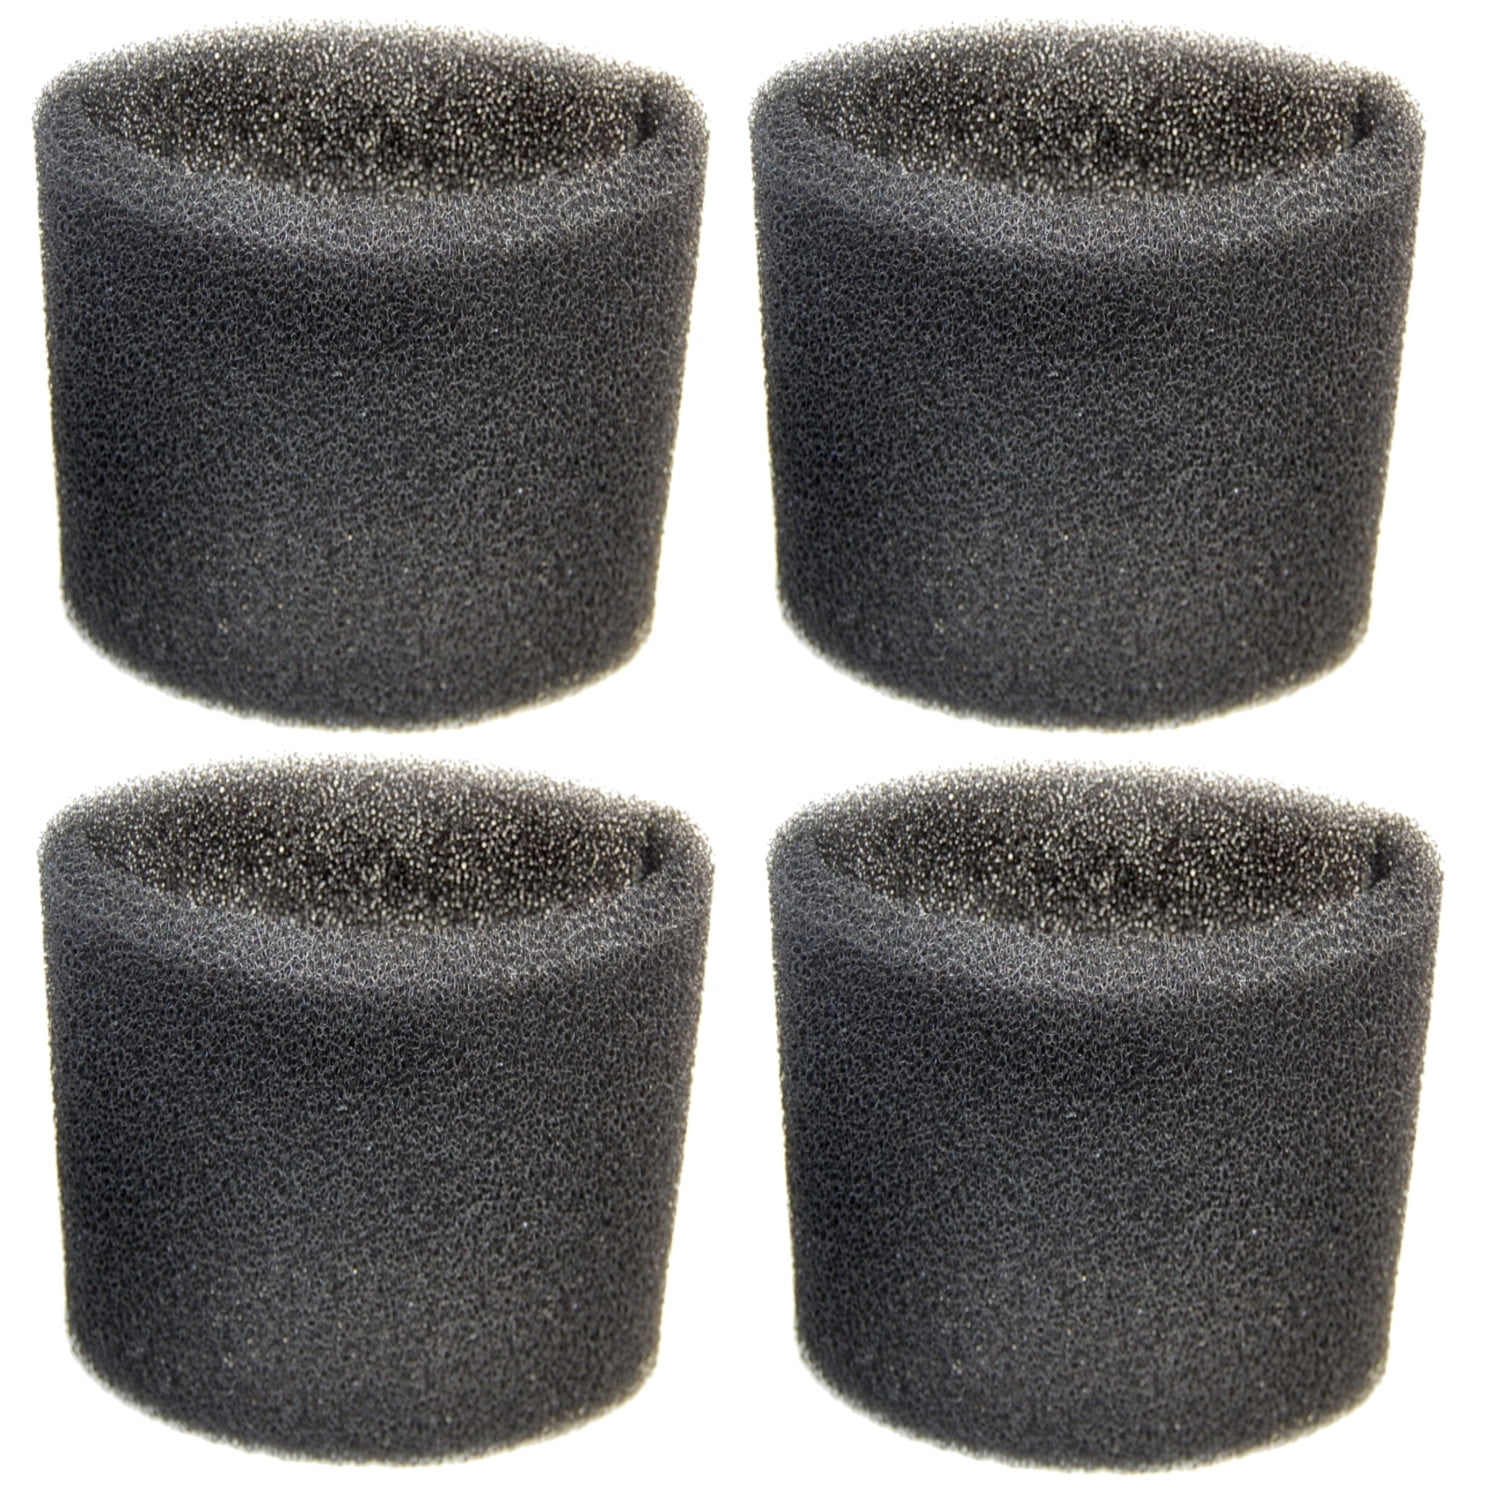 Filters Cotton For Genie & Shop-Vac Wet And Dry Vacuum Cleaners Part Accessories 